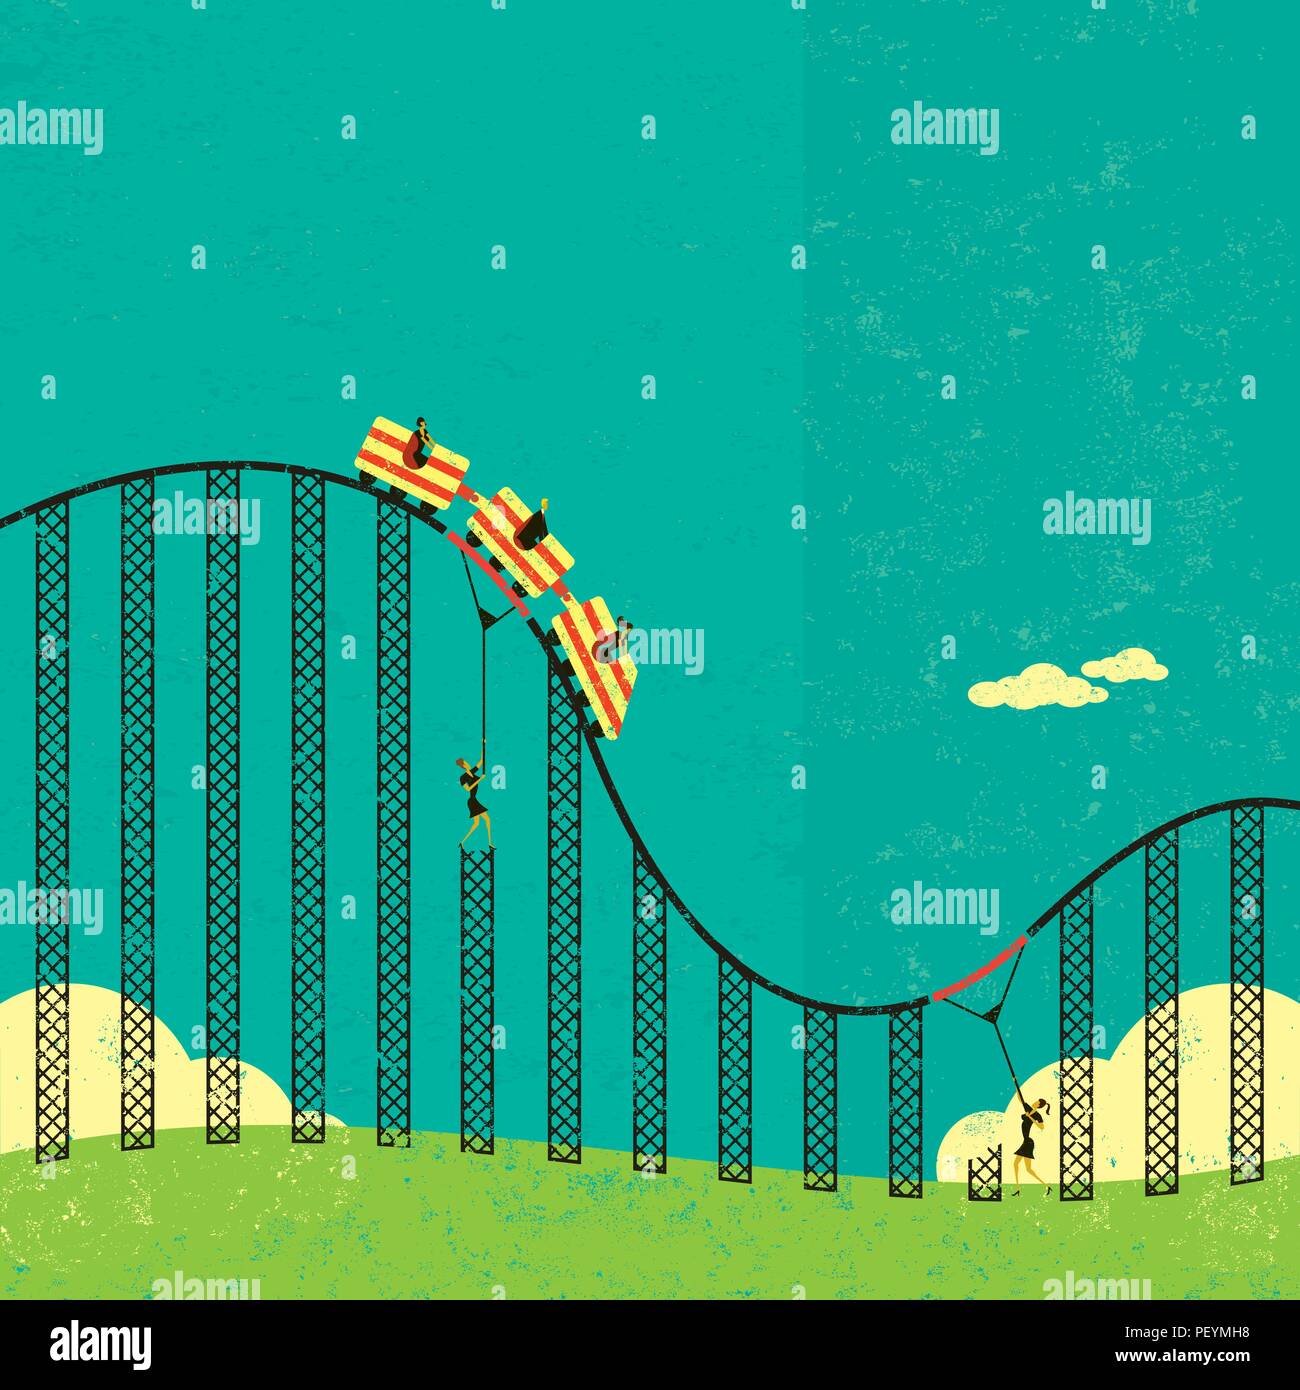 Support in a roller coaster economy. Businesswomen supporting the broken tracks of the roller coaster economy so their clients don't fall off. Stock Vector